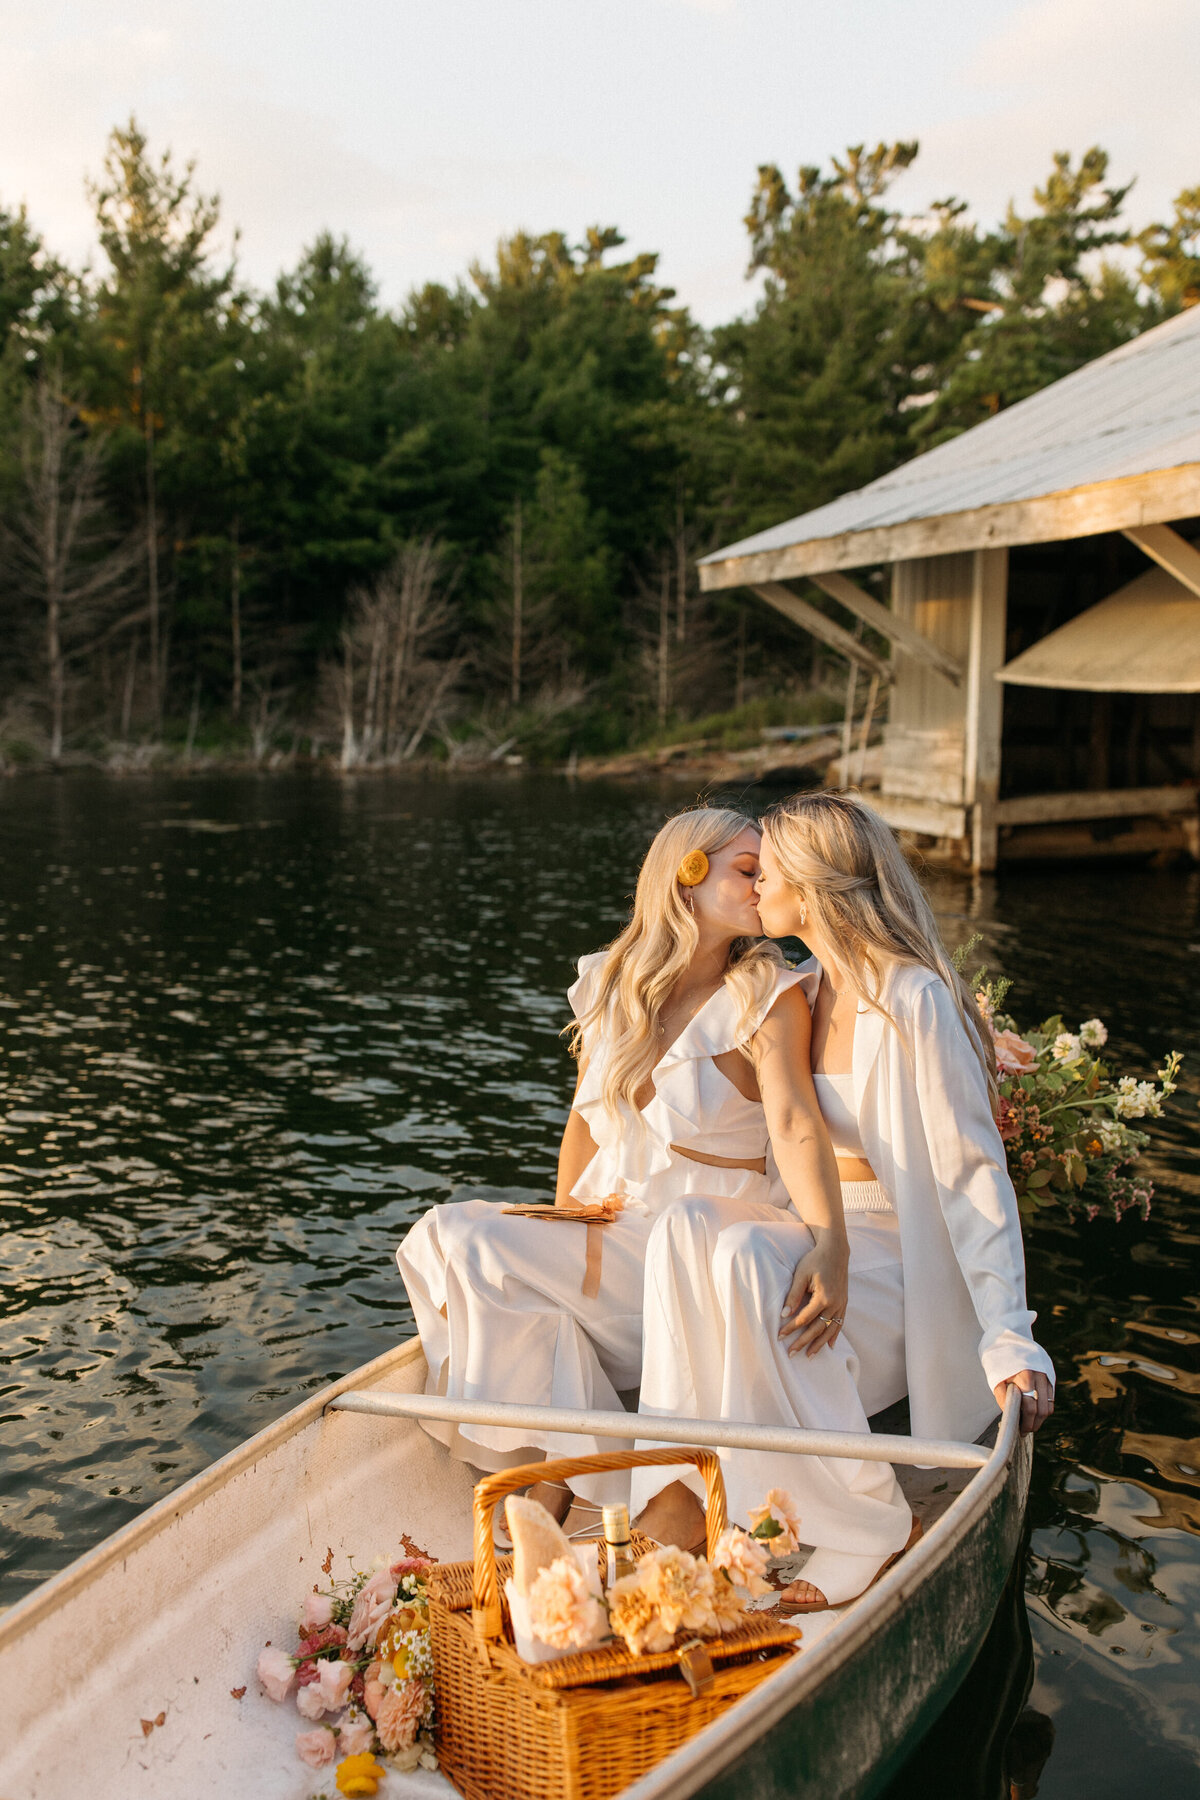 Two women in white dresses sharing a tender moment on a canoe adorned with flowers on a serene lake